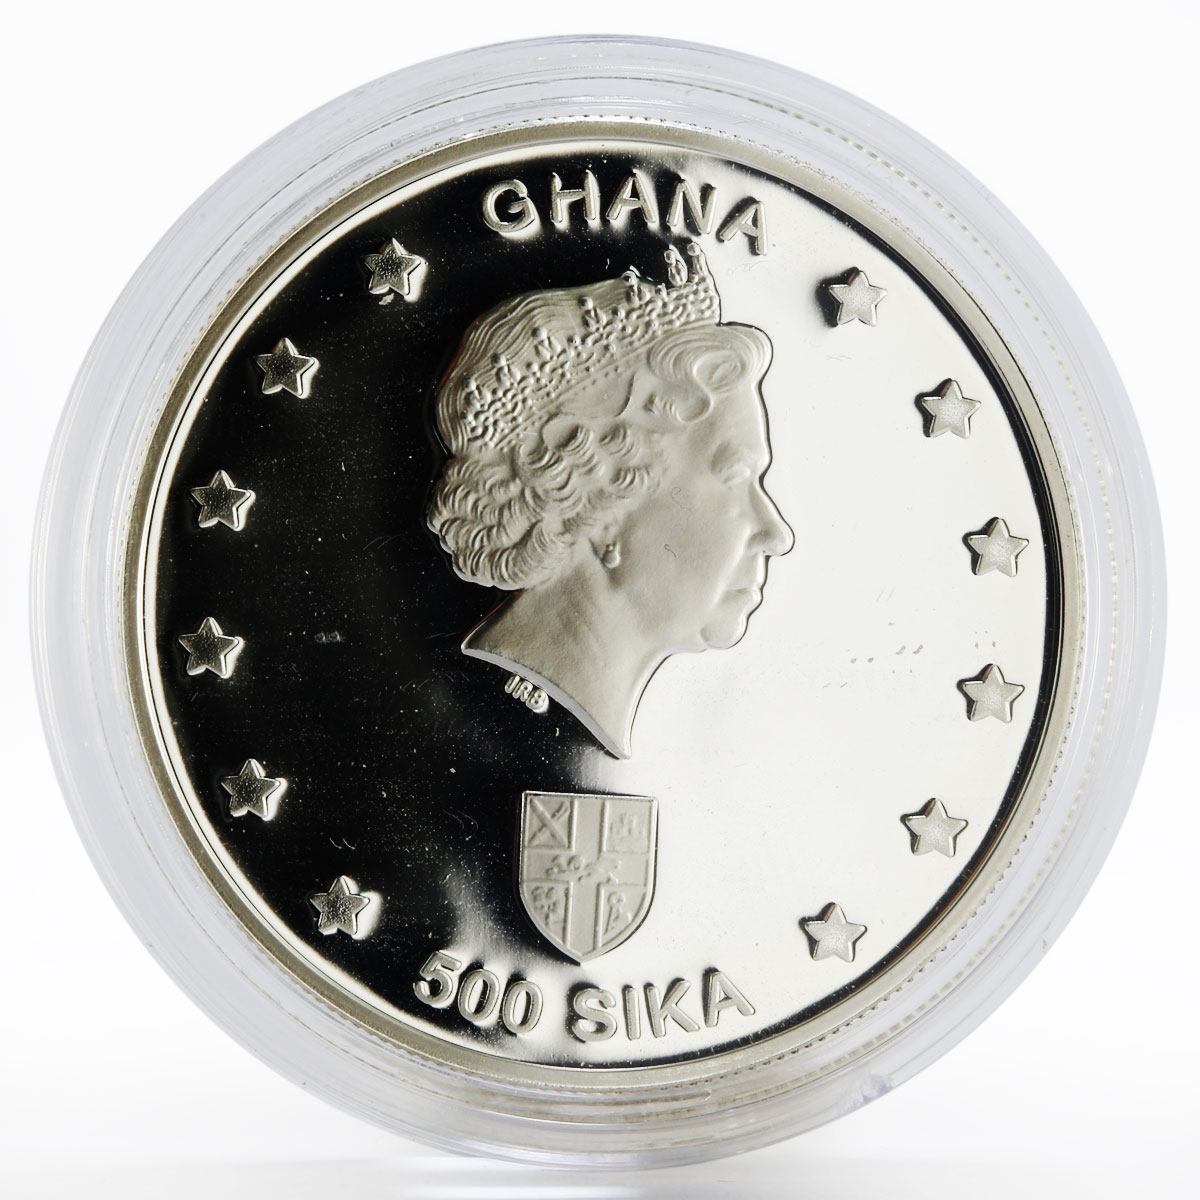 Ghana 500 sika Berlin Olympic Stadium proof silver coin 2004